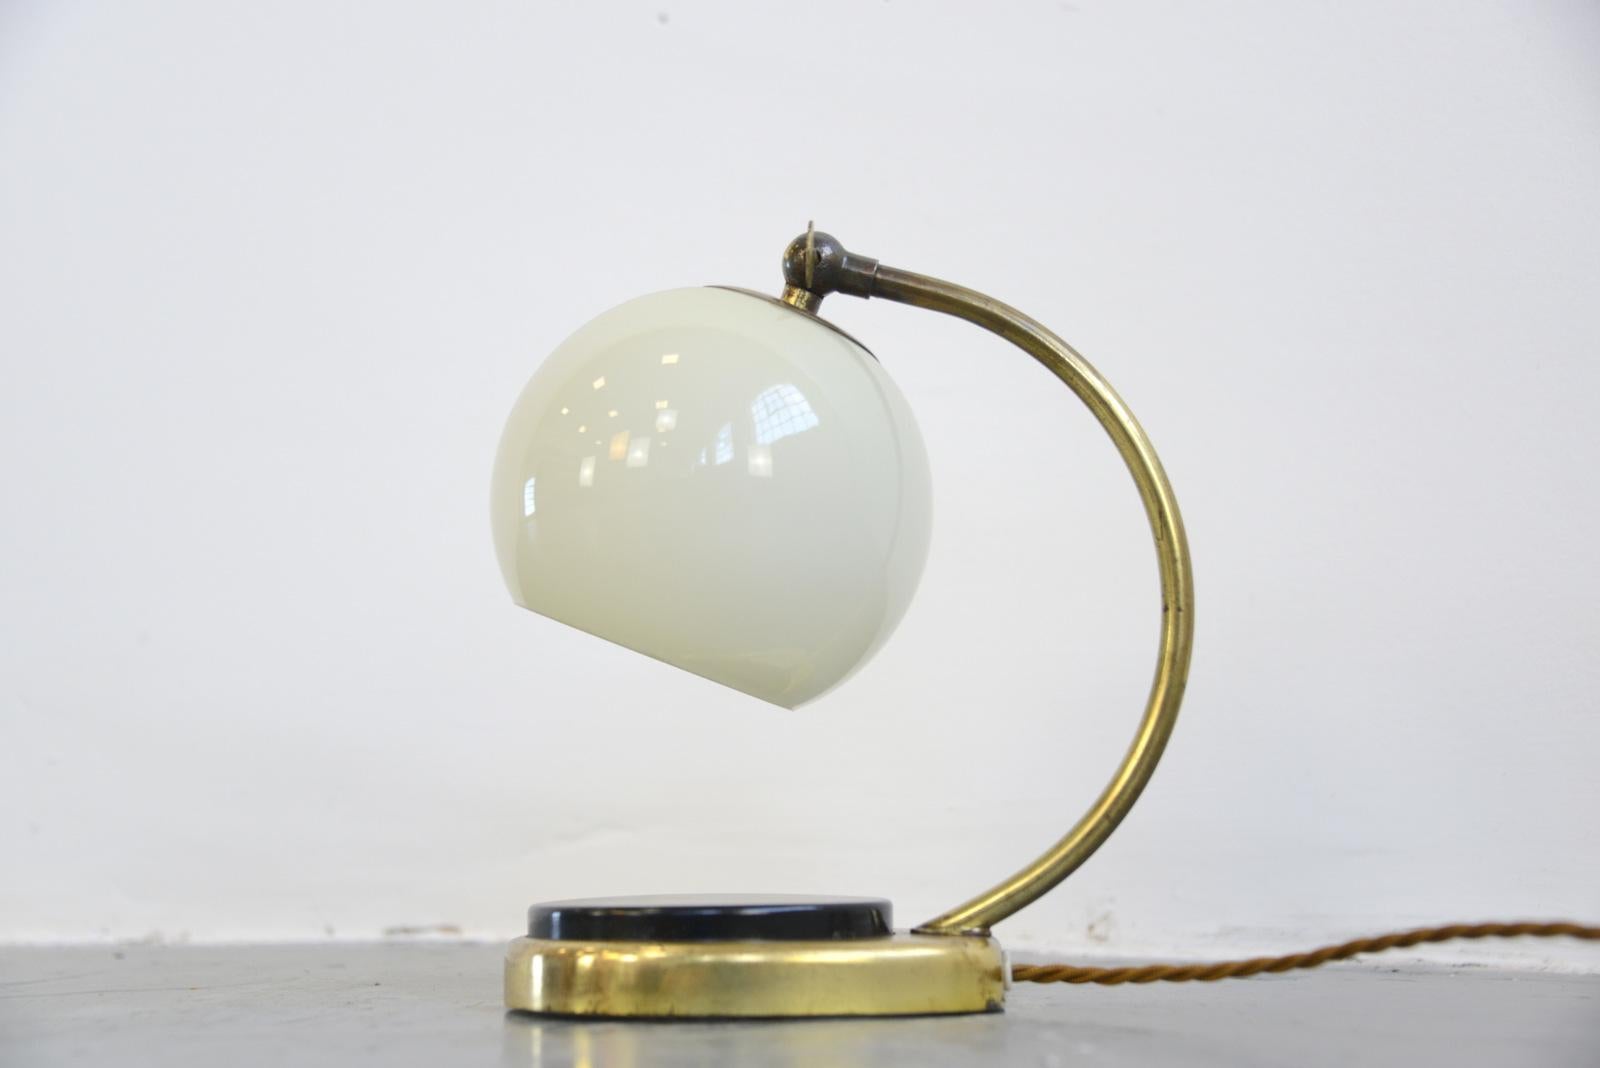 Bauhaus bedside lamp by Marianne Brandt, circa 1930s

- Brass base and arm
- Large bakelite touch switch
- Original opaline globe shade
- Takes e27 fitting bulbs
- Designed by Marianne Brandt
- Made by Ruppel, Gotha
- Known as the